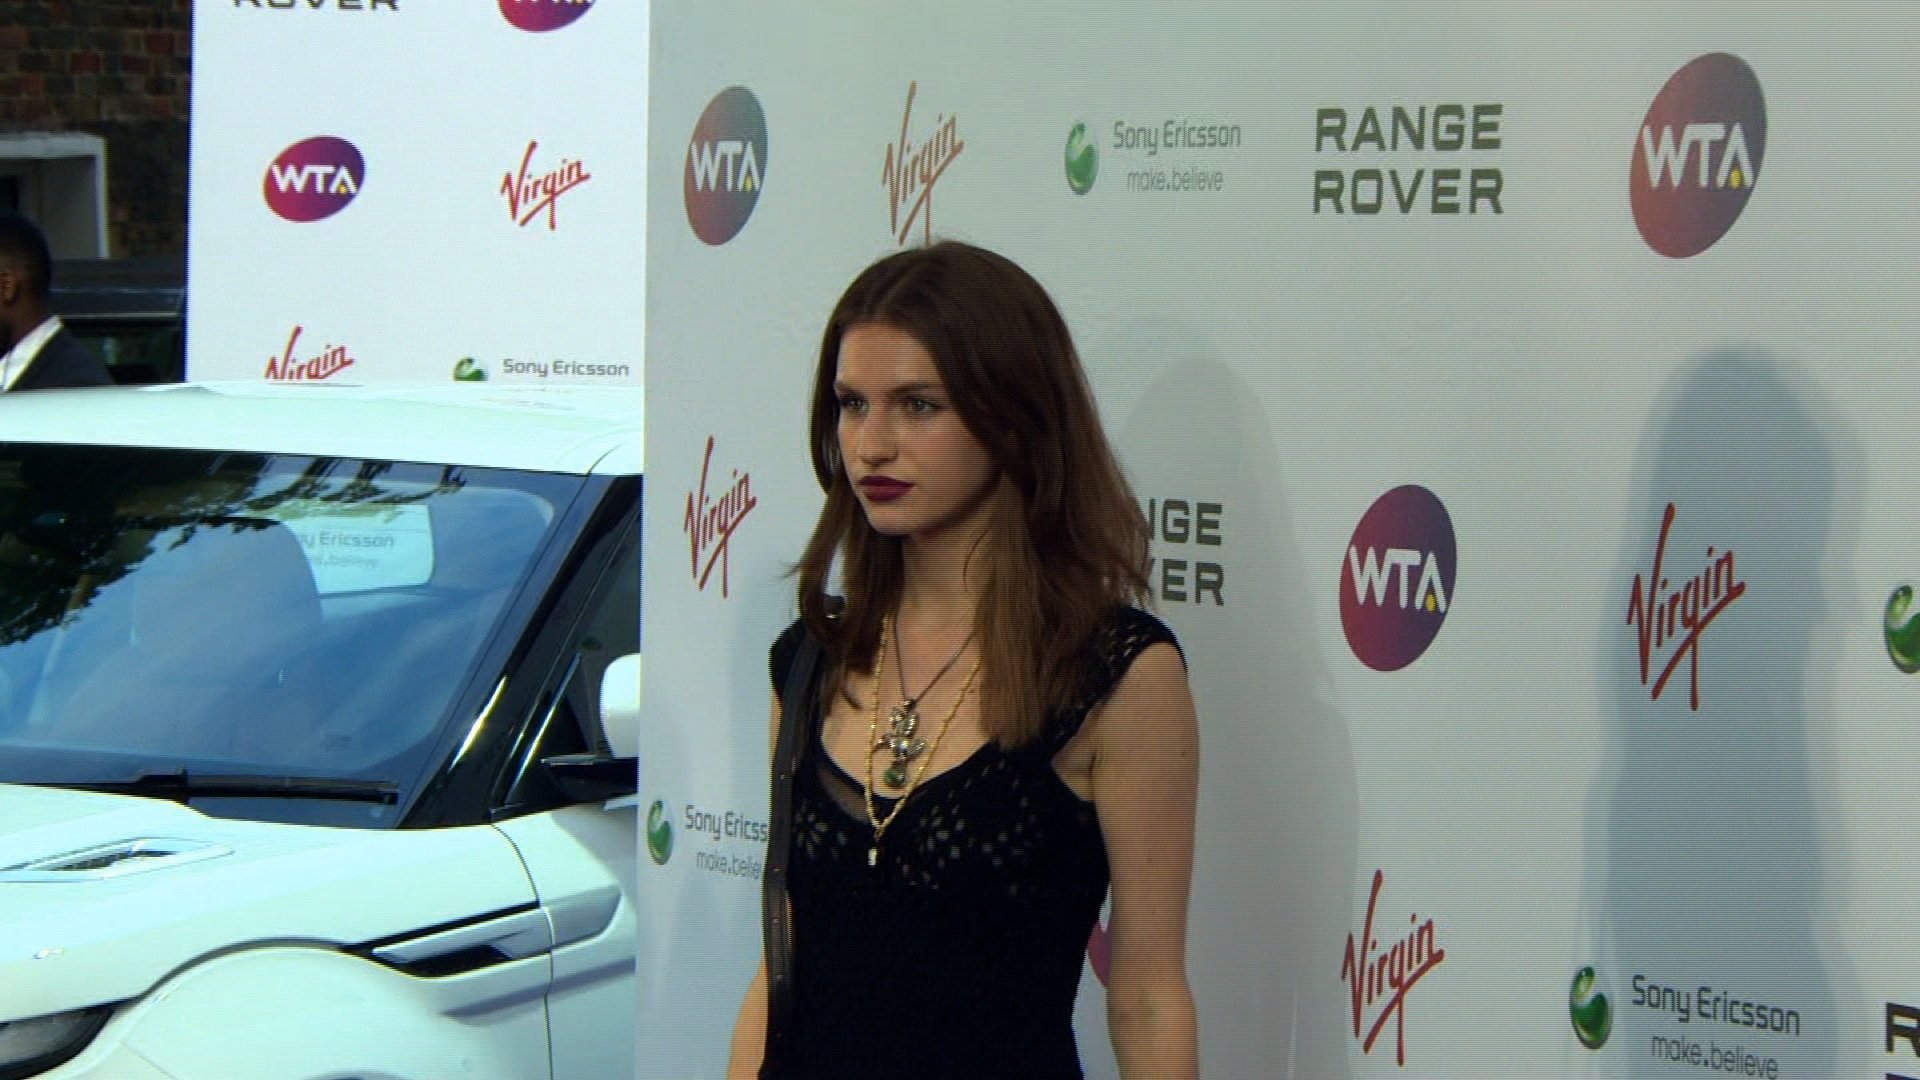 Tali Lennox, daughter of Annie Lennox, arrives at the red carpet event for a pre-Wimbledon party.